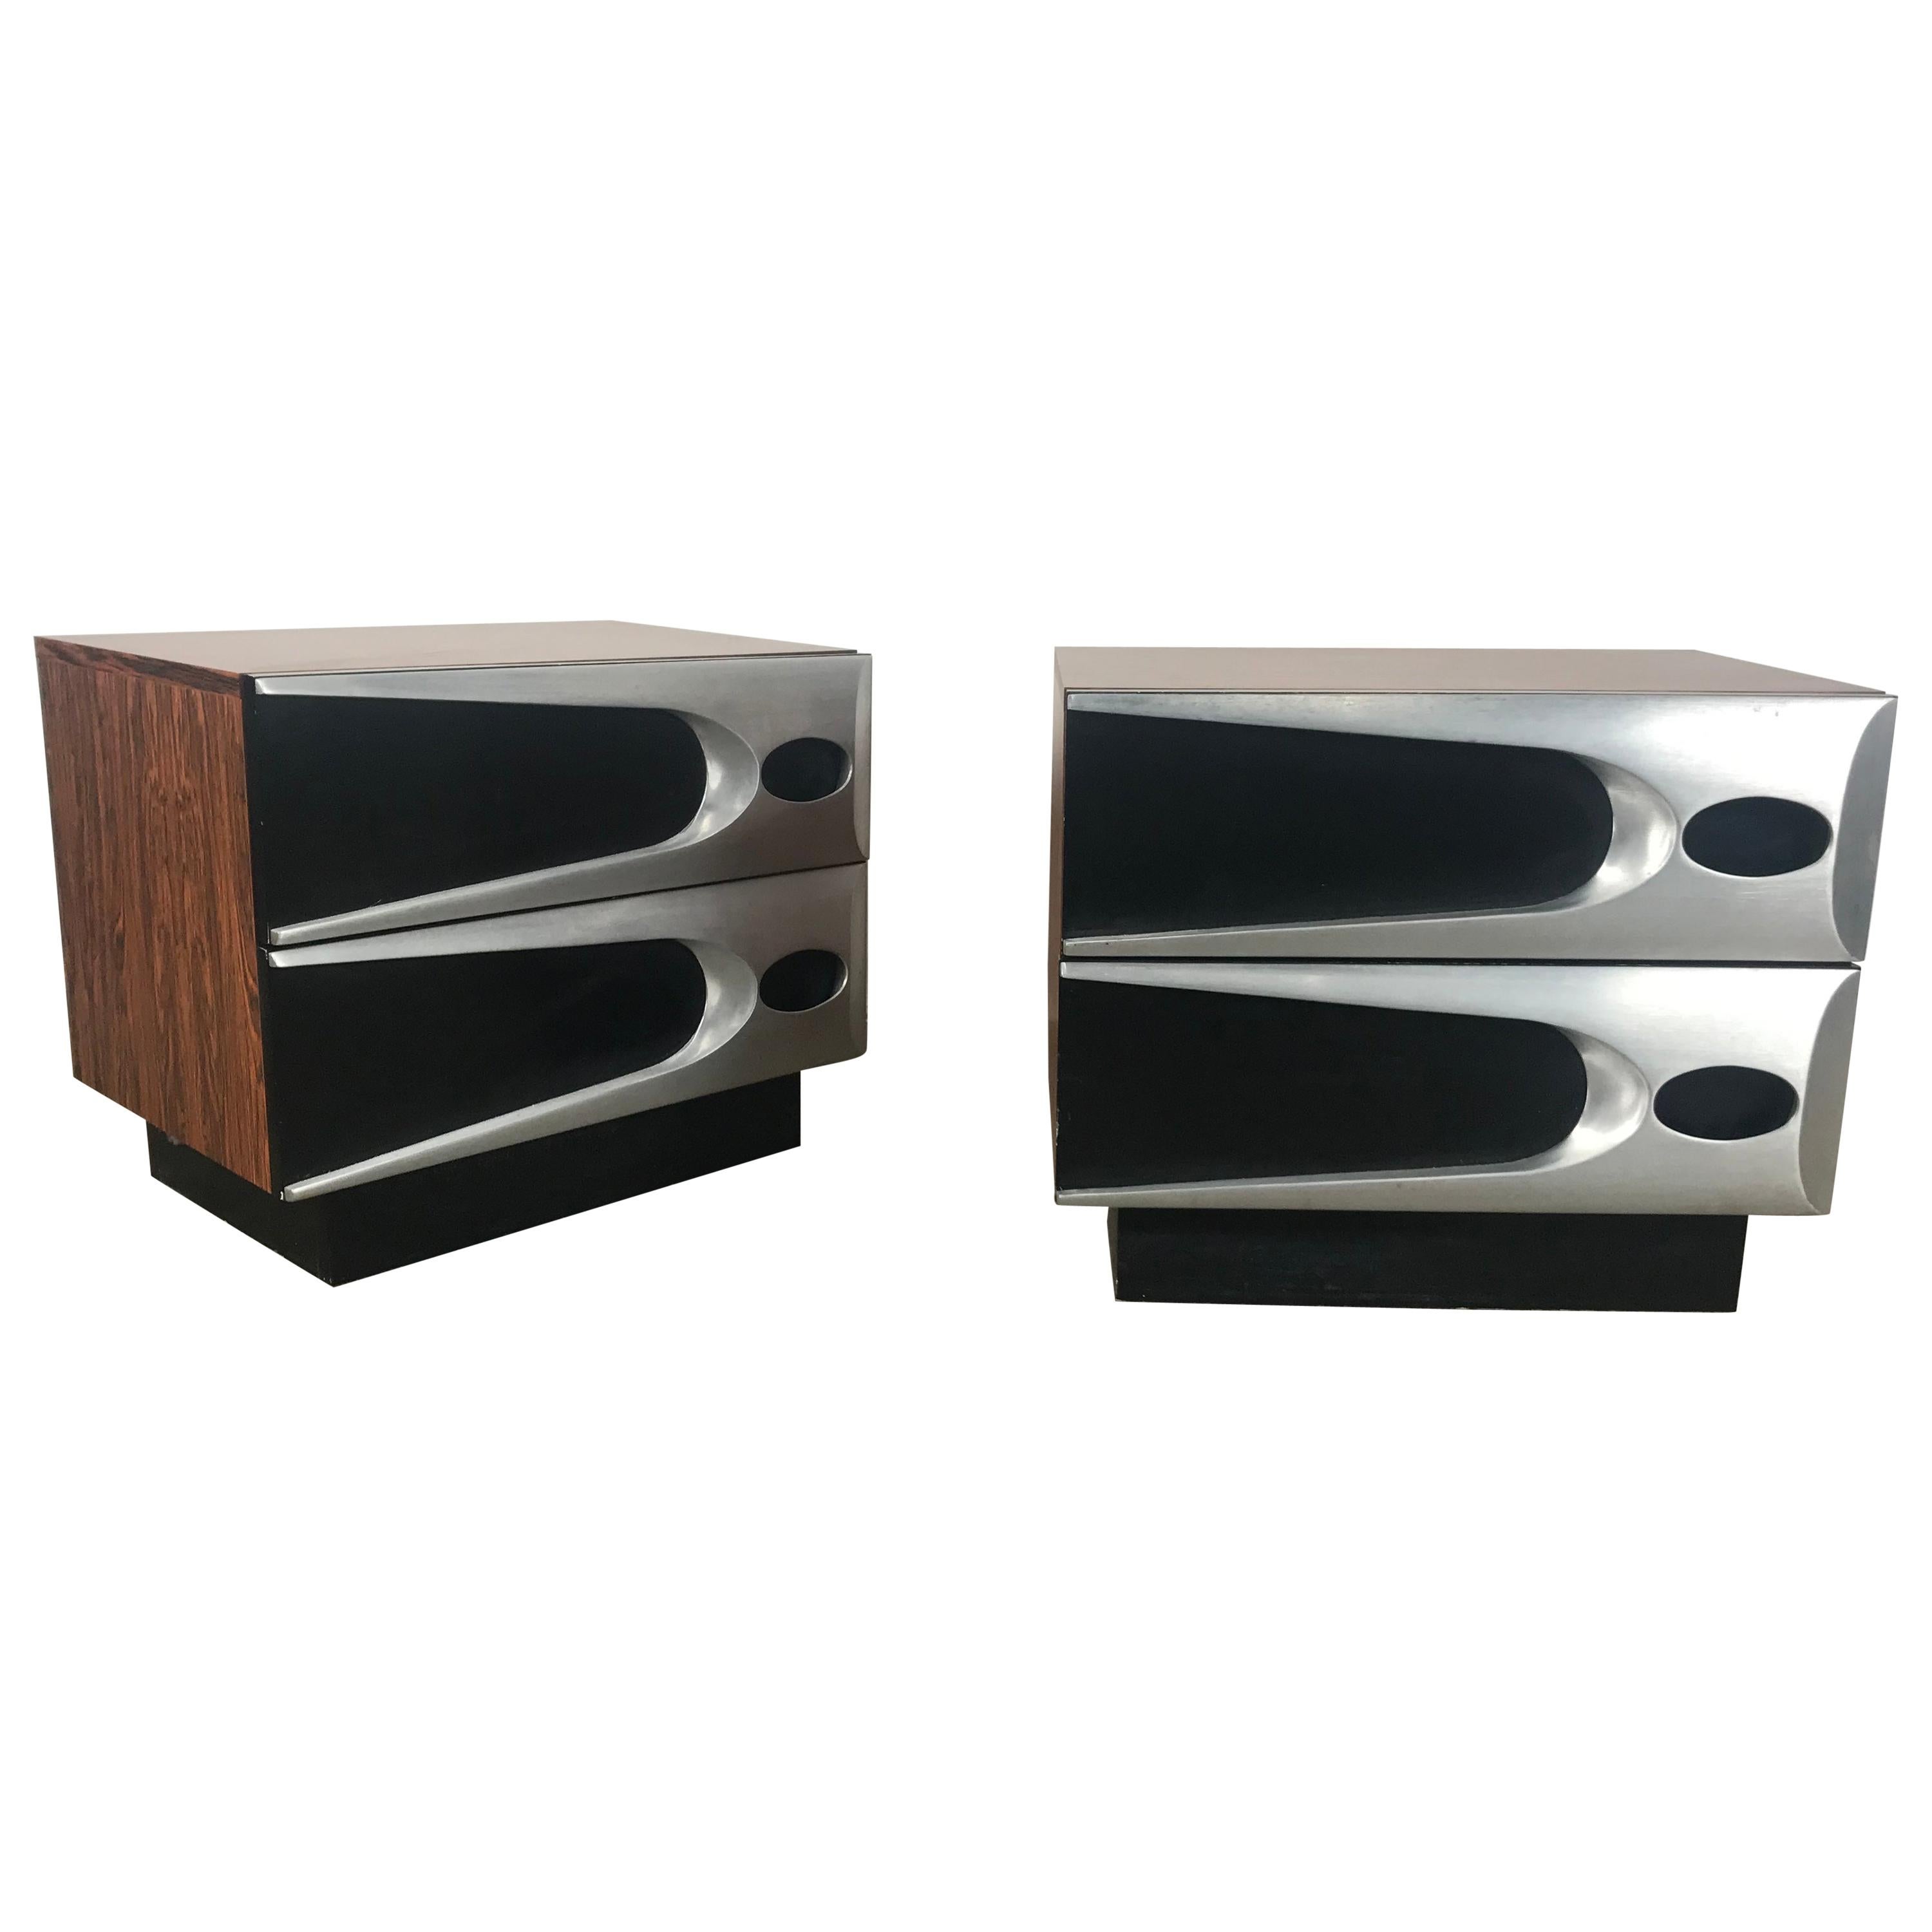 Unusual Modernist Space Age Nightstands, Melamine Rosewood and Aluminum